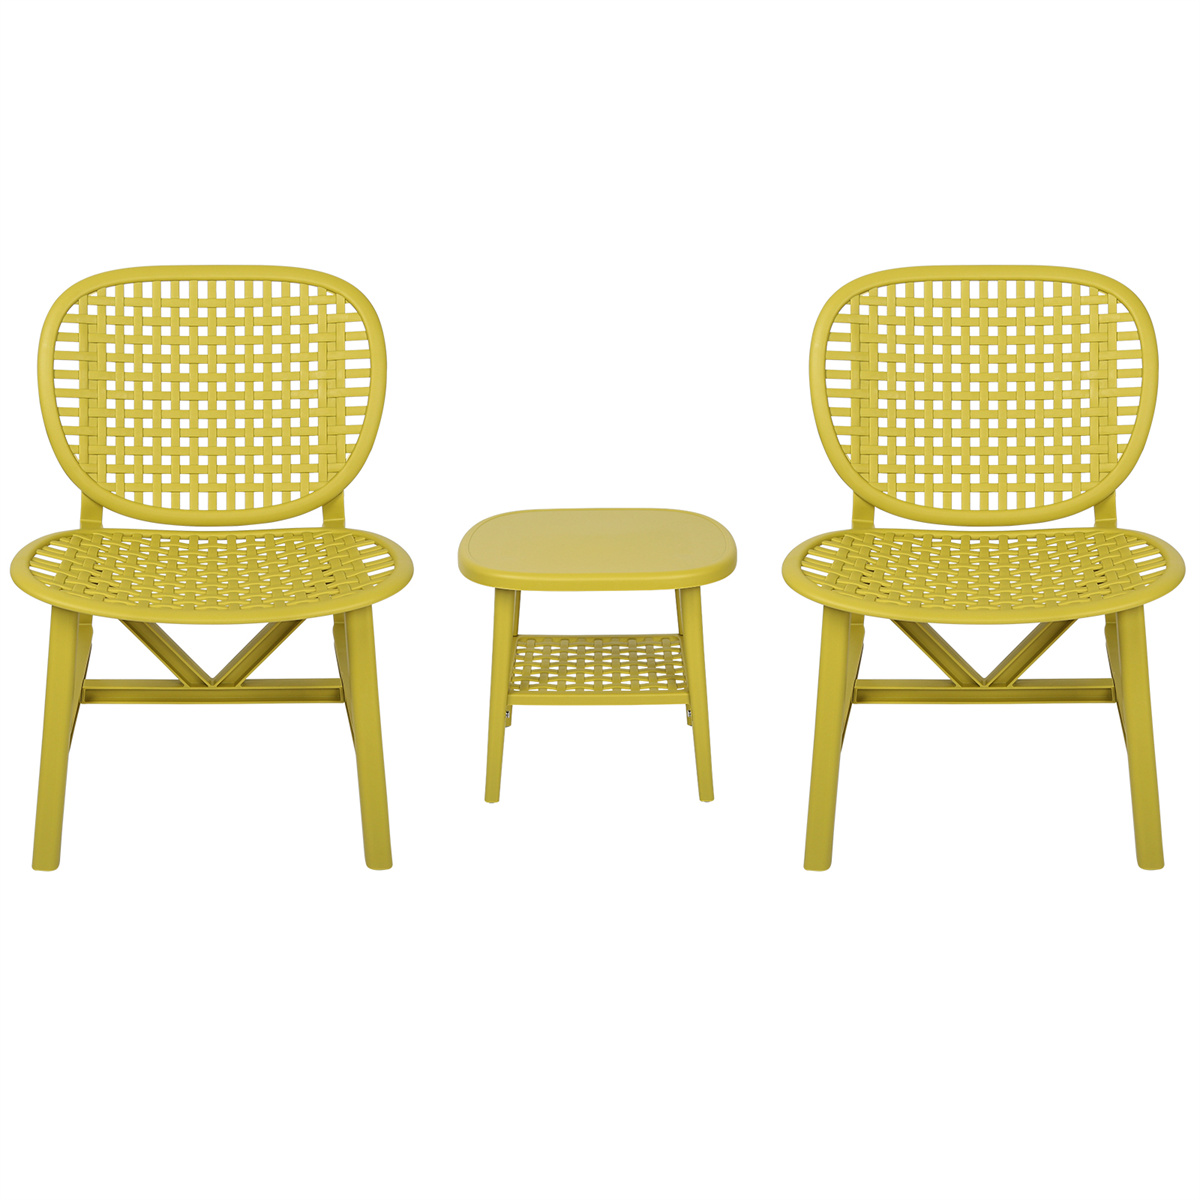 3Pcs Patio Table Chair Set, Bistro Set Hollow Conversation Coffee Table Set with 1 End Table & 2 Lounge Chairs, All Weather Outdoor Patio Chair with Widened Seat for Balcony Garden Yard, Yellow - image 1 of 7